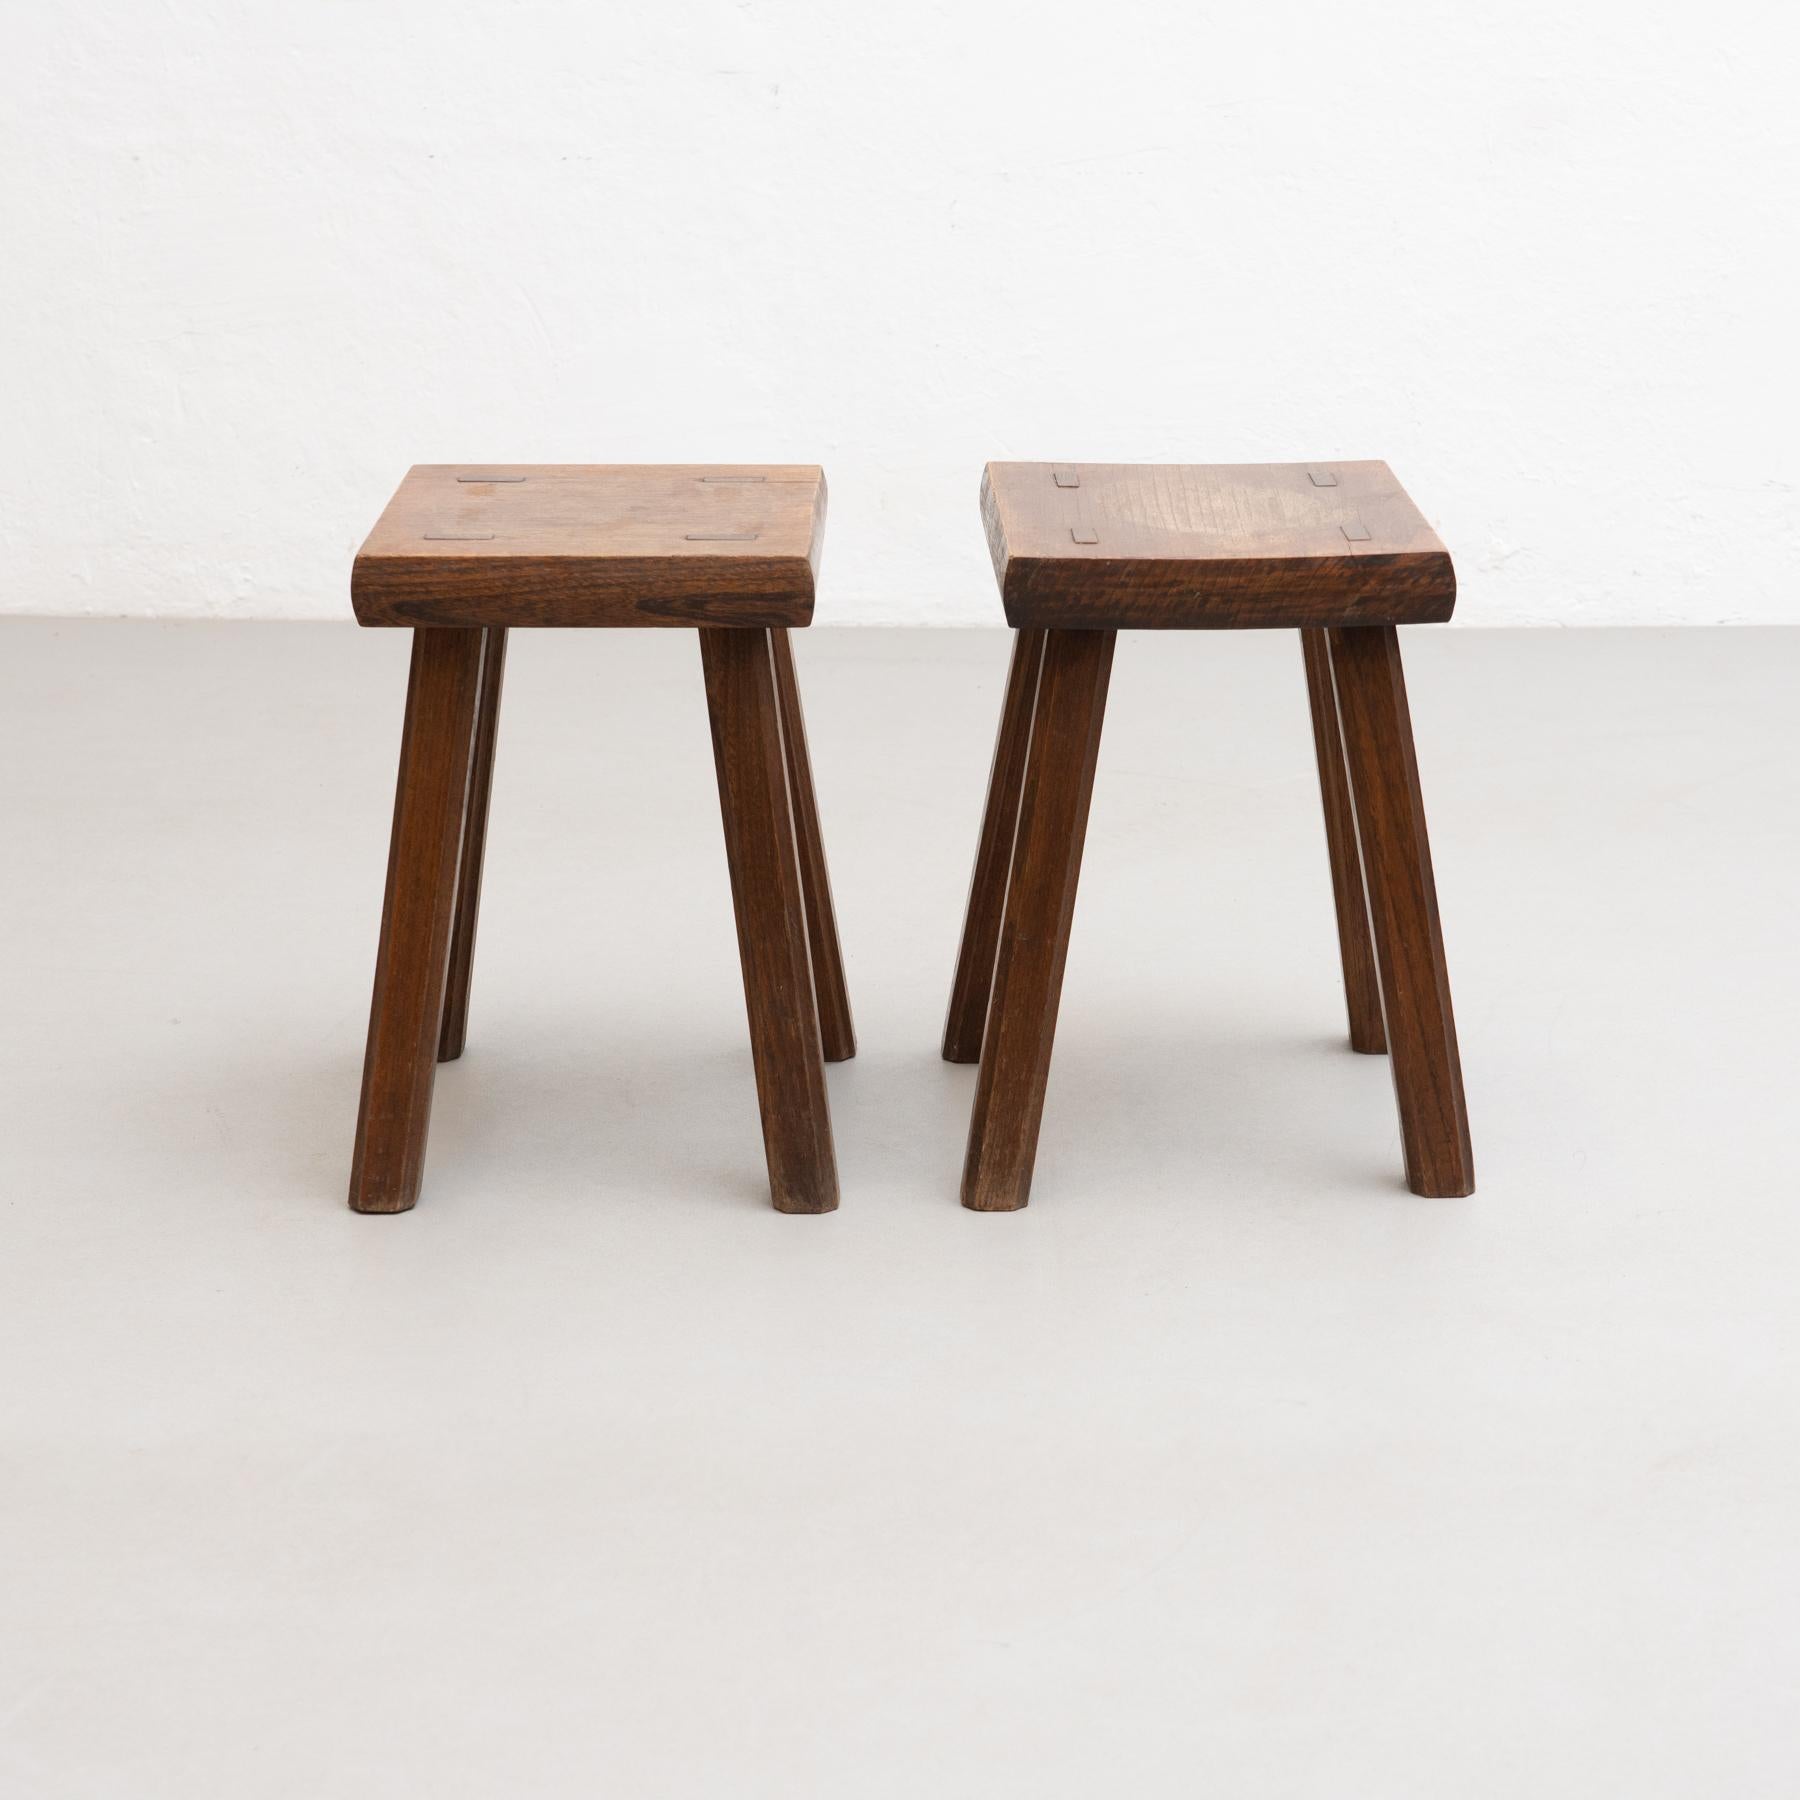 Set of two oak wood stools in style of Pierre Chapo.

Manufactured in France, circa 1960.

Material:
Solid oakwood.

Pierre Chapo is born in a family of craftsmen. After his regular studies, he worked in the workshop of a navy carpenter. He